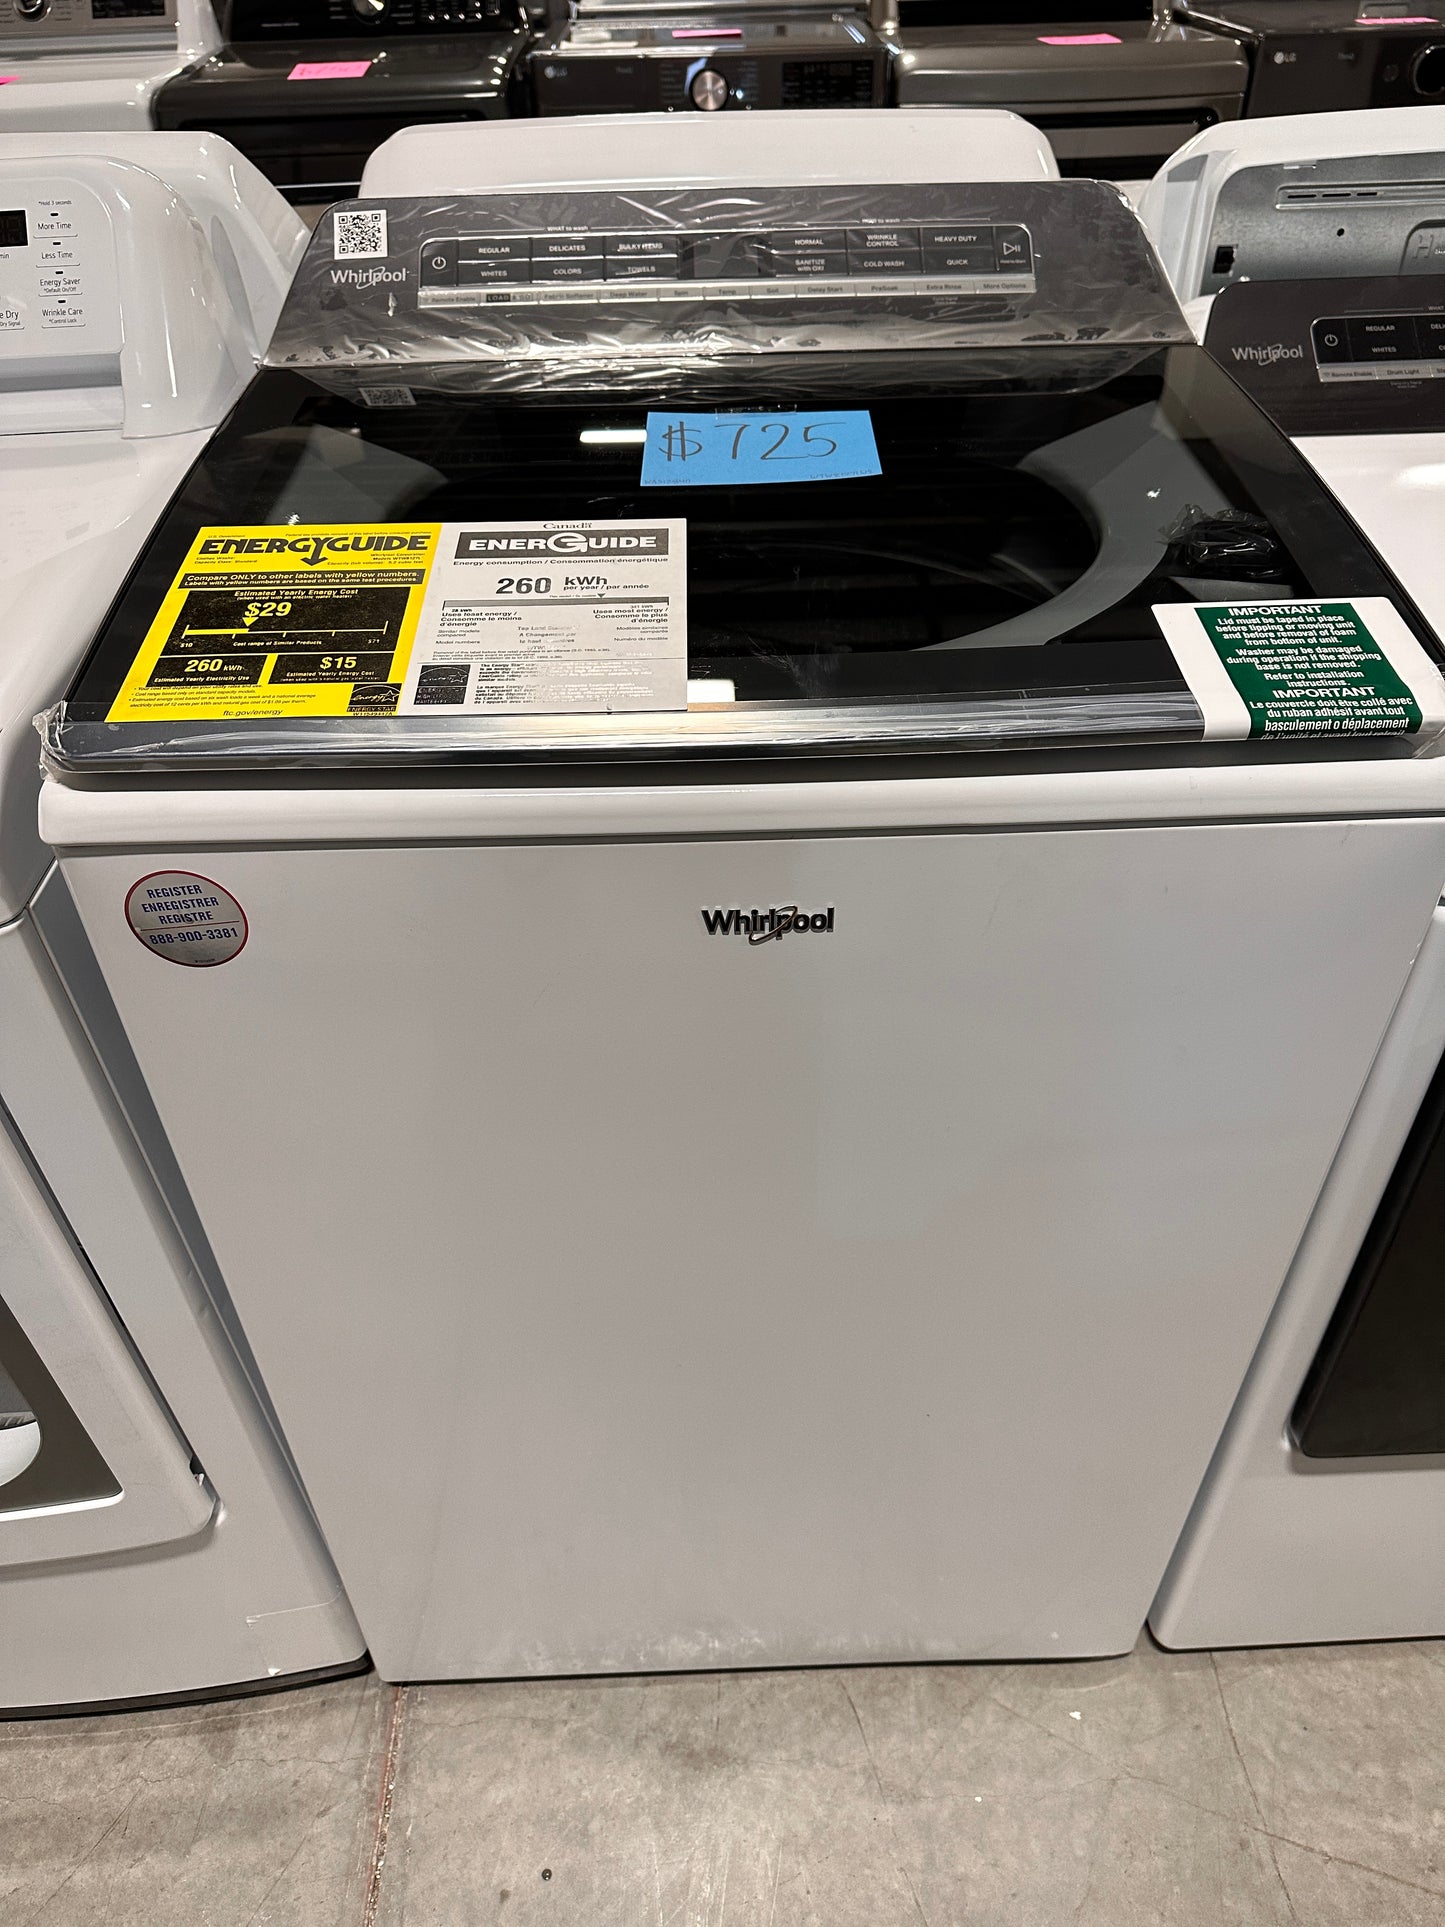 WHIRLPOOL SMART TOP LOAD WASHER - WAS12840